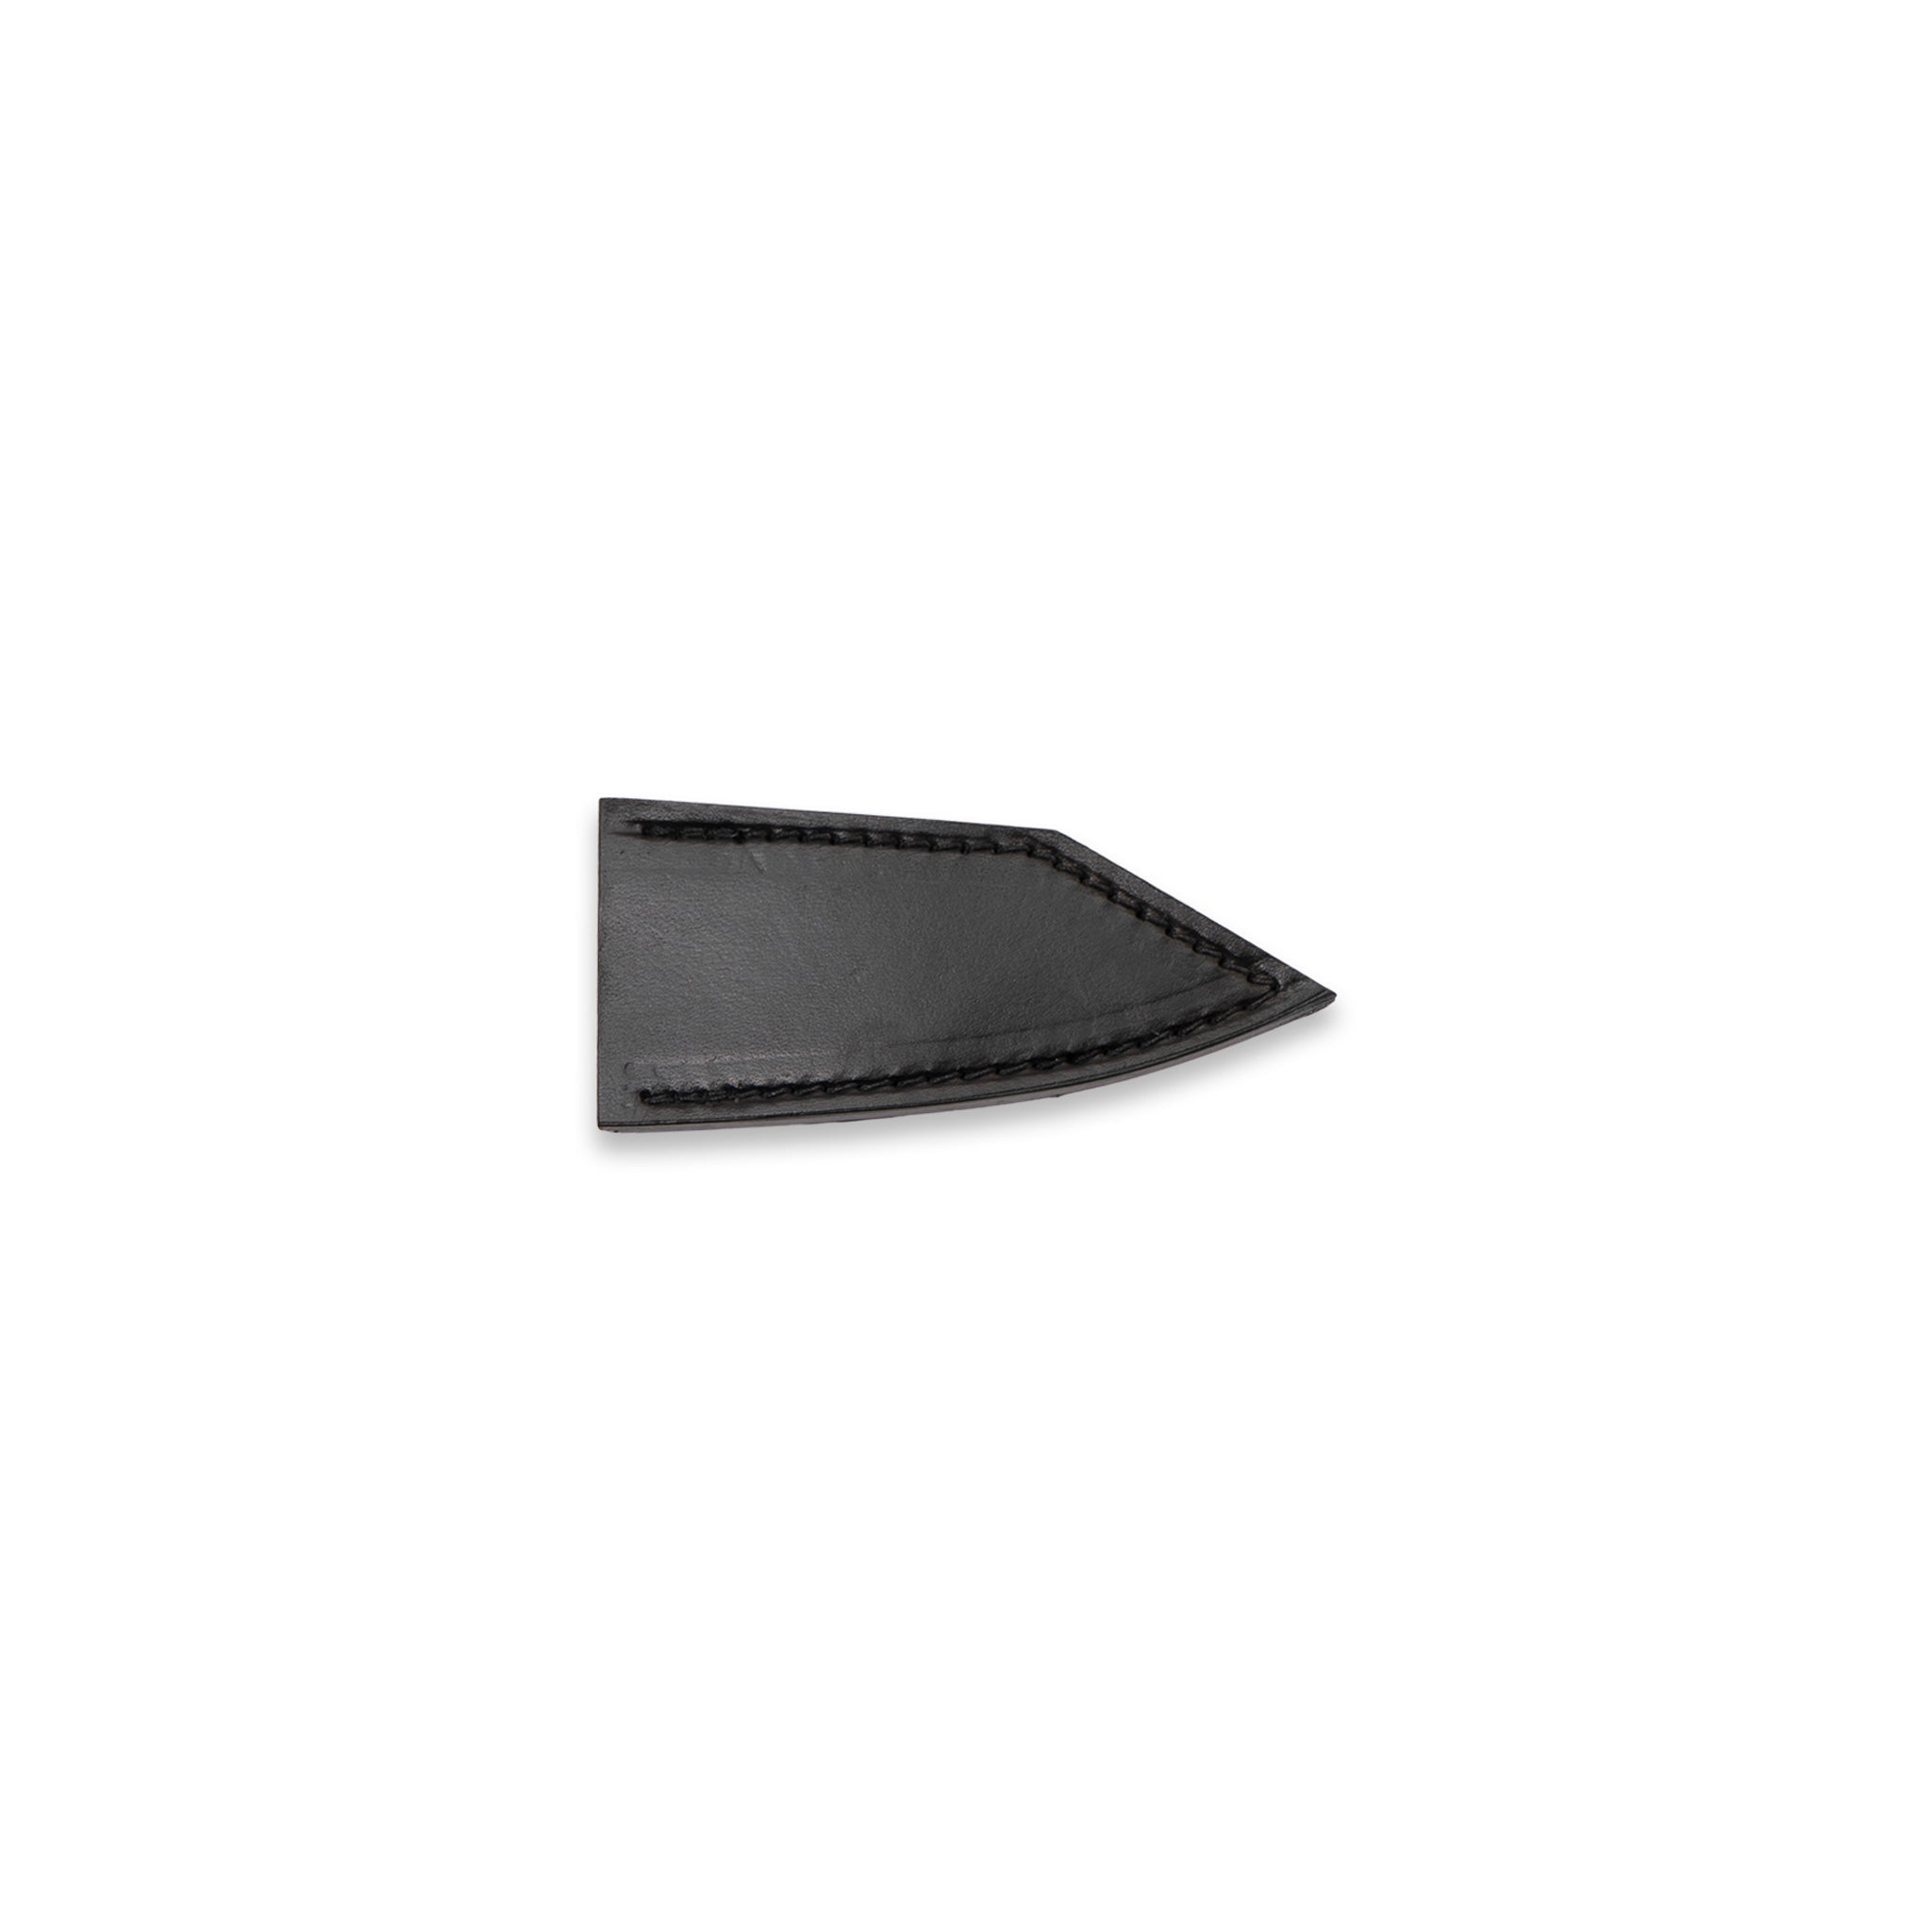 Town Cutler black leather scabbard knife blade cover for paring knife.